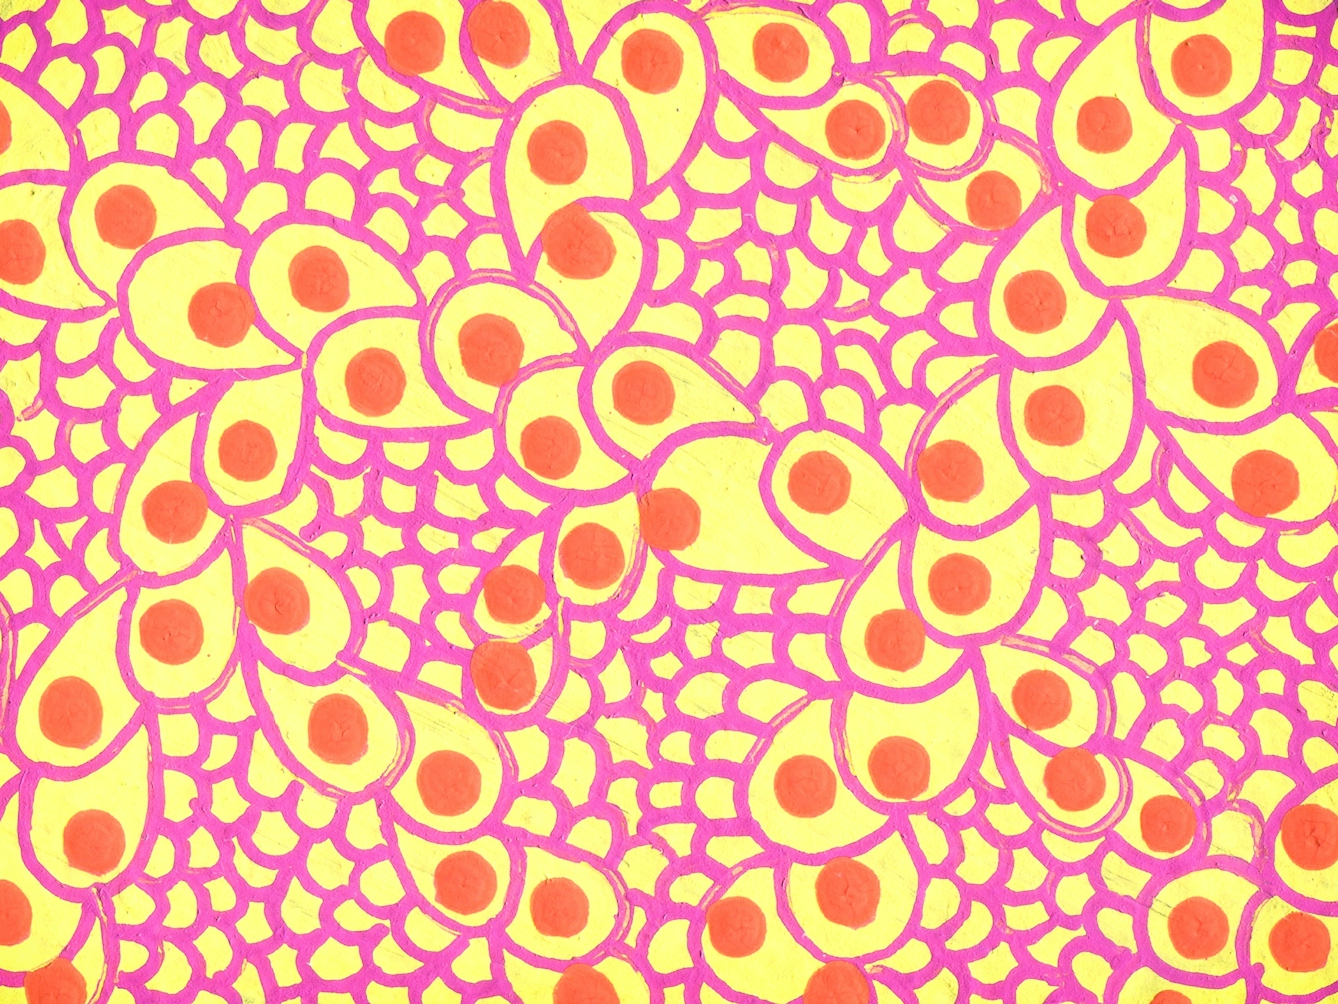 Artwork created by painting over the surface of a black and white photographic print with colourful paint. The artwork shows a painted yellow background, covered in orange dots, surrounded by loops of purple lines, arranged almost like scales or feathers. The texture of the paint can be seen.